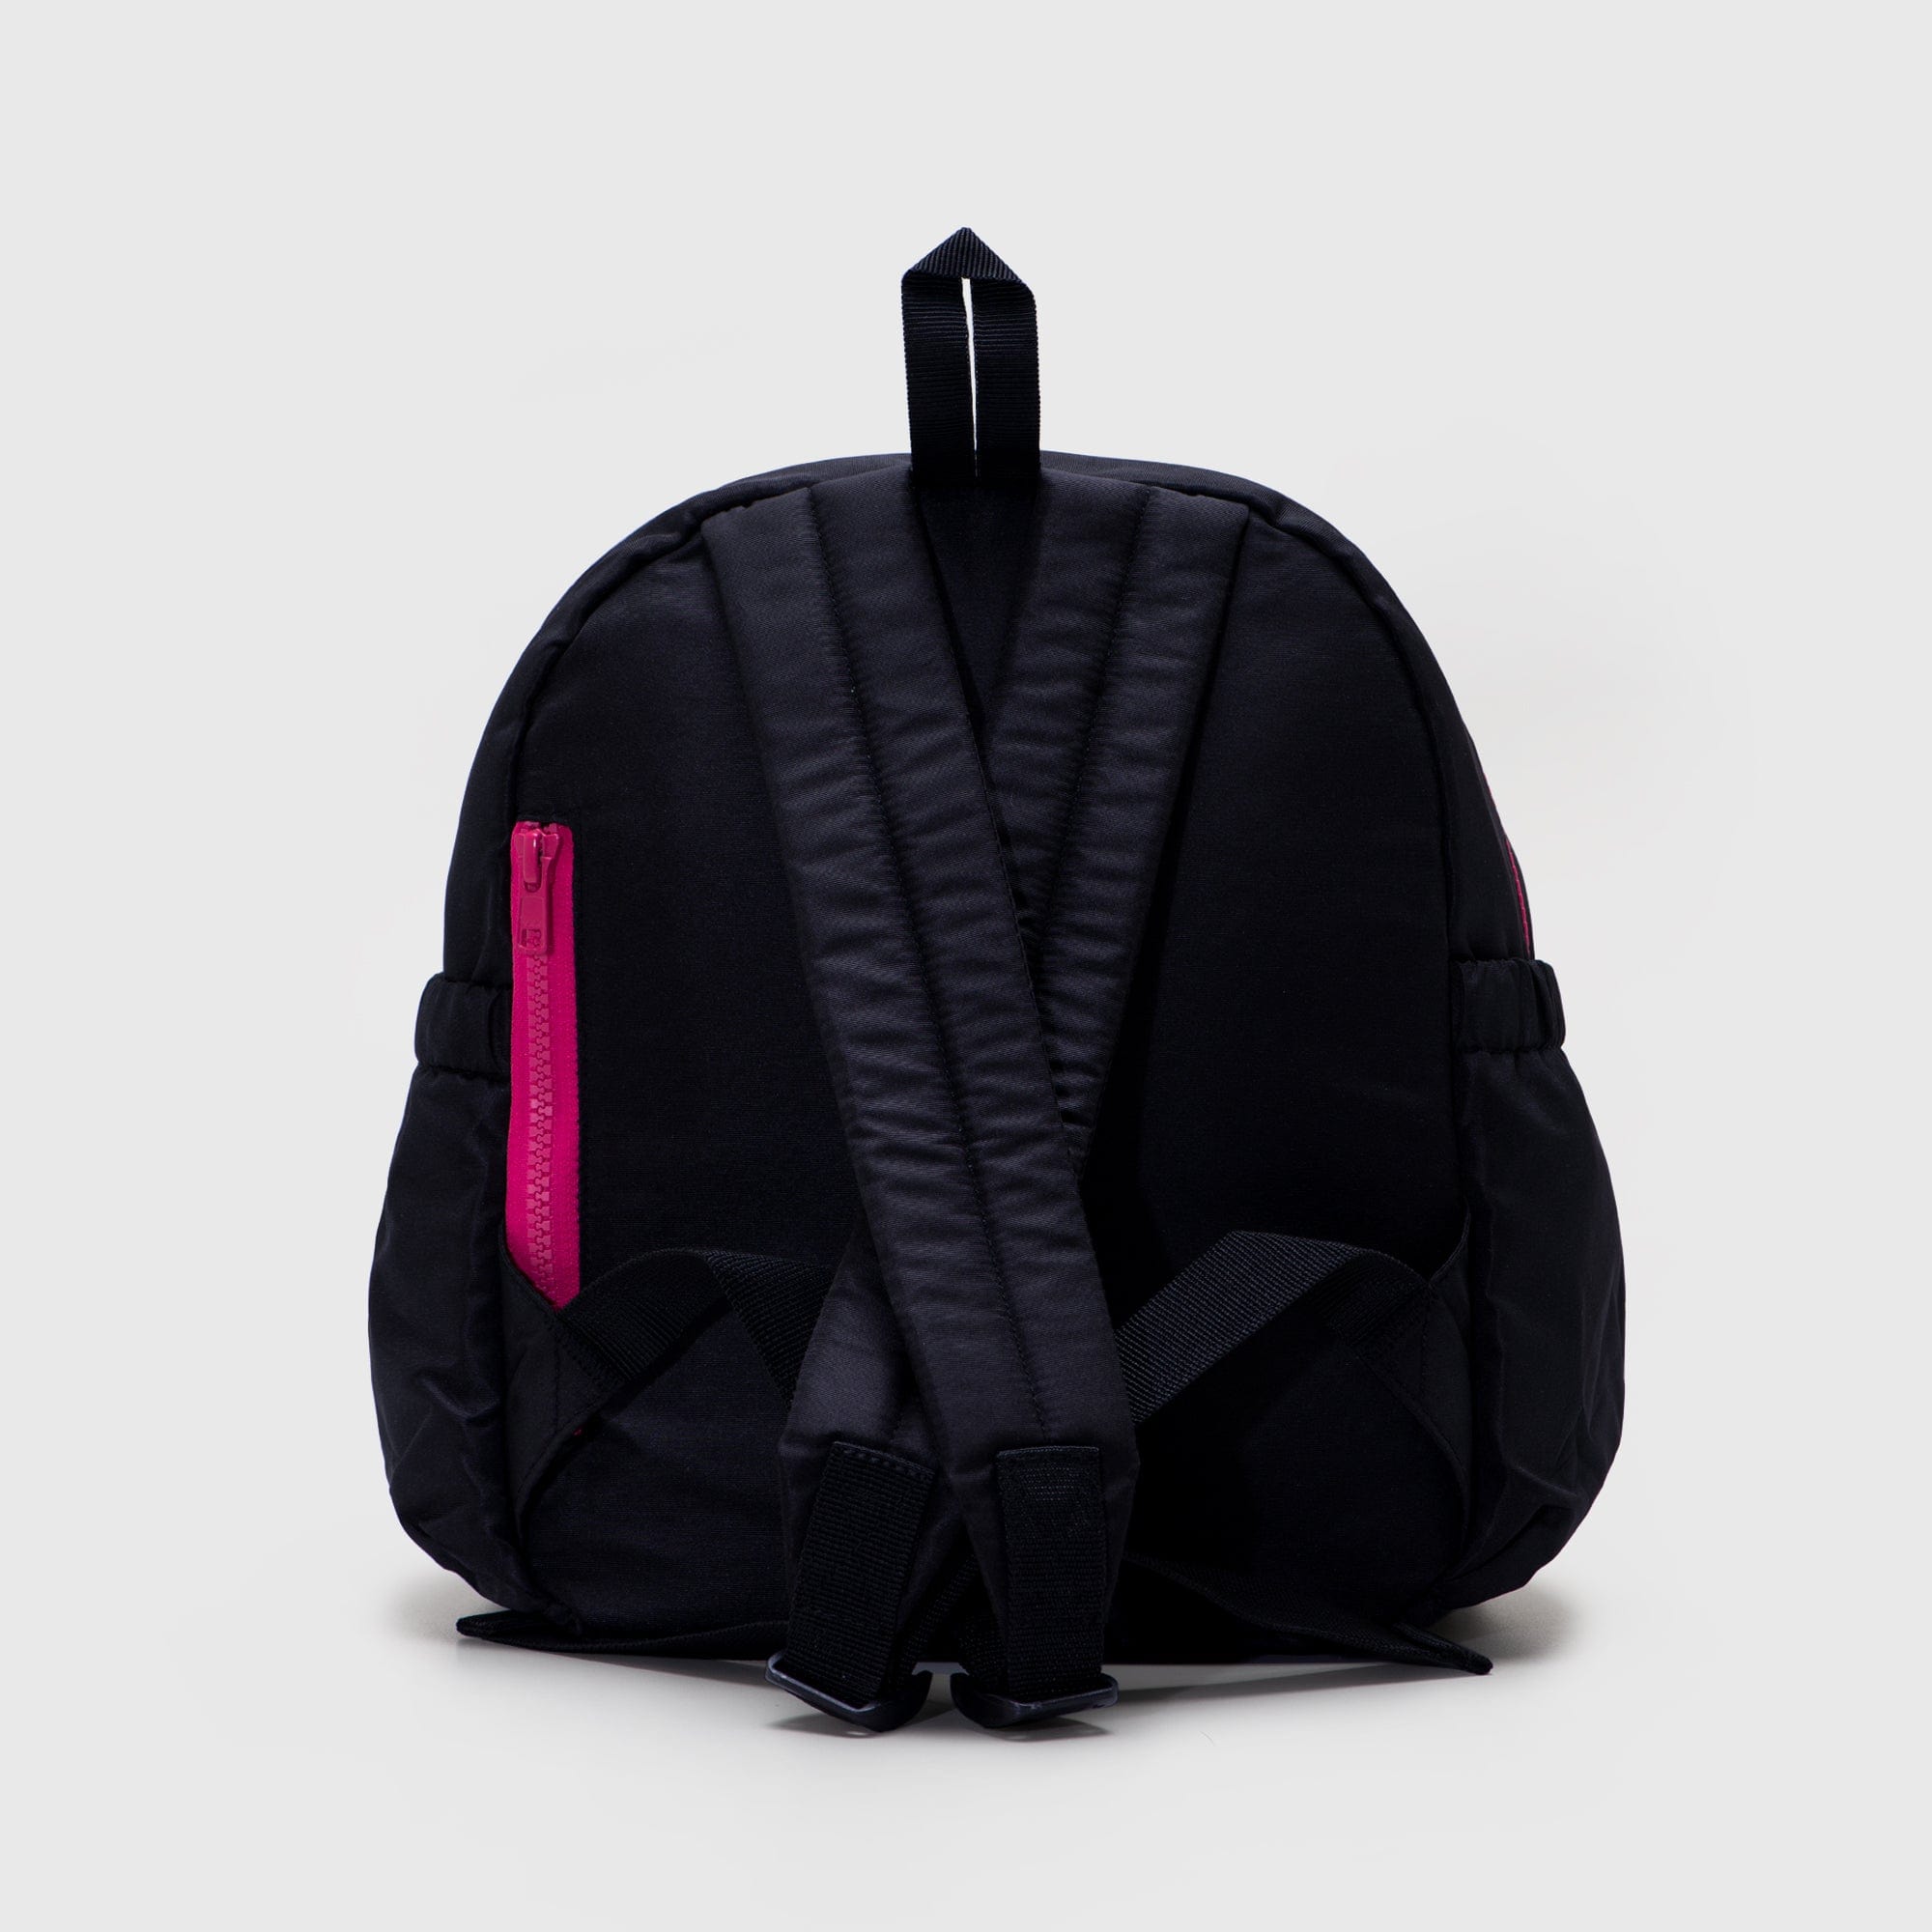 Adorable Projects Official Backpack Evalina Mini Backpack Tufting